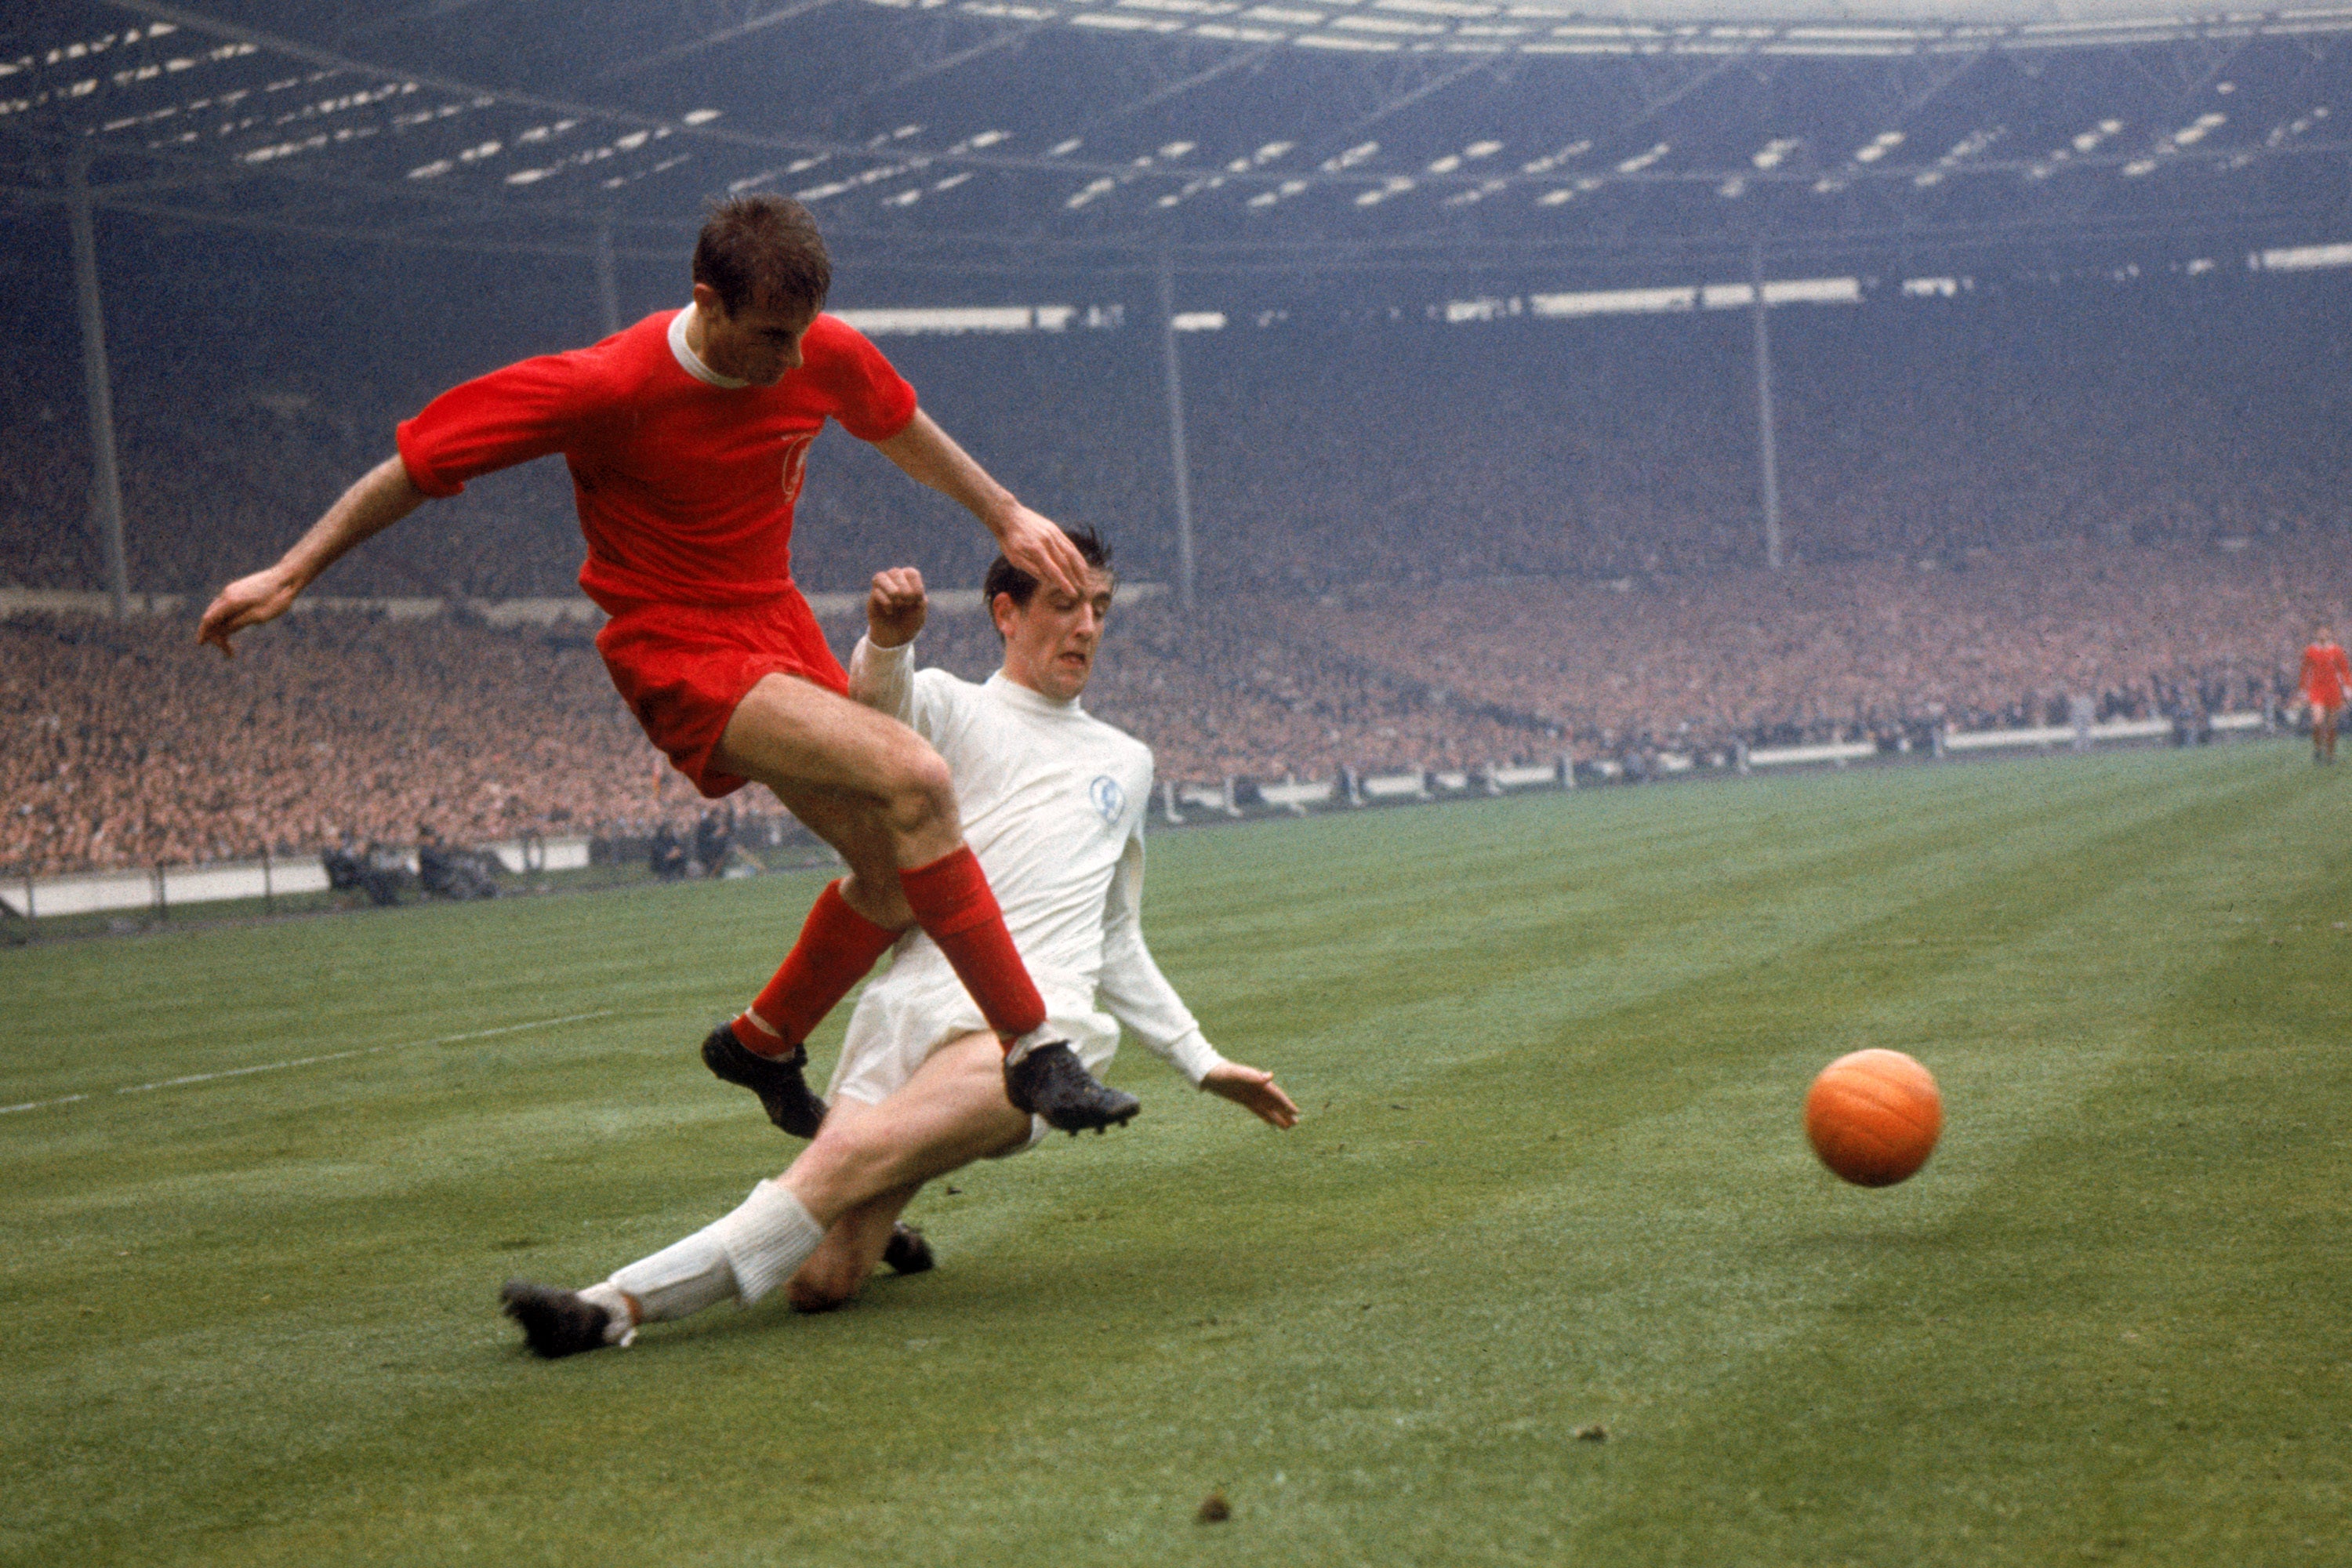 Roger Hunt is second on Liverpool’s all-time goalscoring list, his tally of 285 including the opener in the 1965 FA Cup final win against Leeds